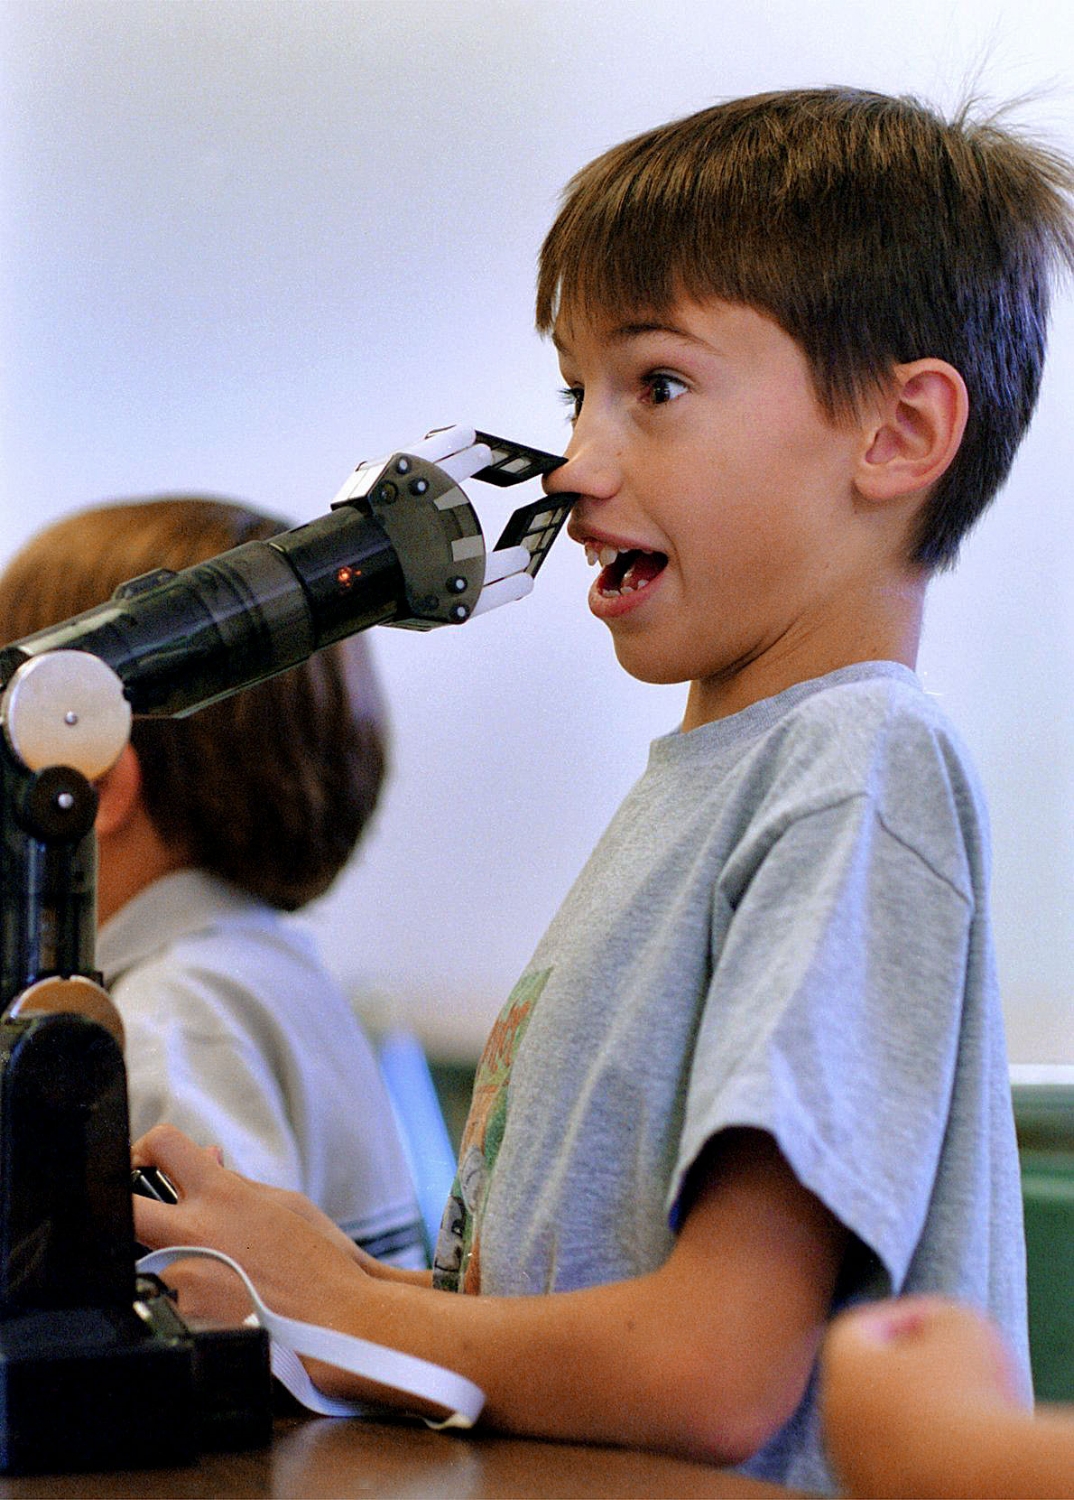  Jason Kaye 9, pinches his nose in the grip of a mechanical robotic arm at the R.G. Smith Clubhouse in Folsom on Thursday July 25, 2002. "Mad Scientist" Jason Turner put on a science class themed "Machine Mania" and featured simple machines. 